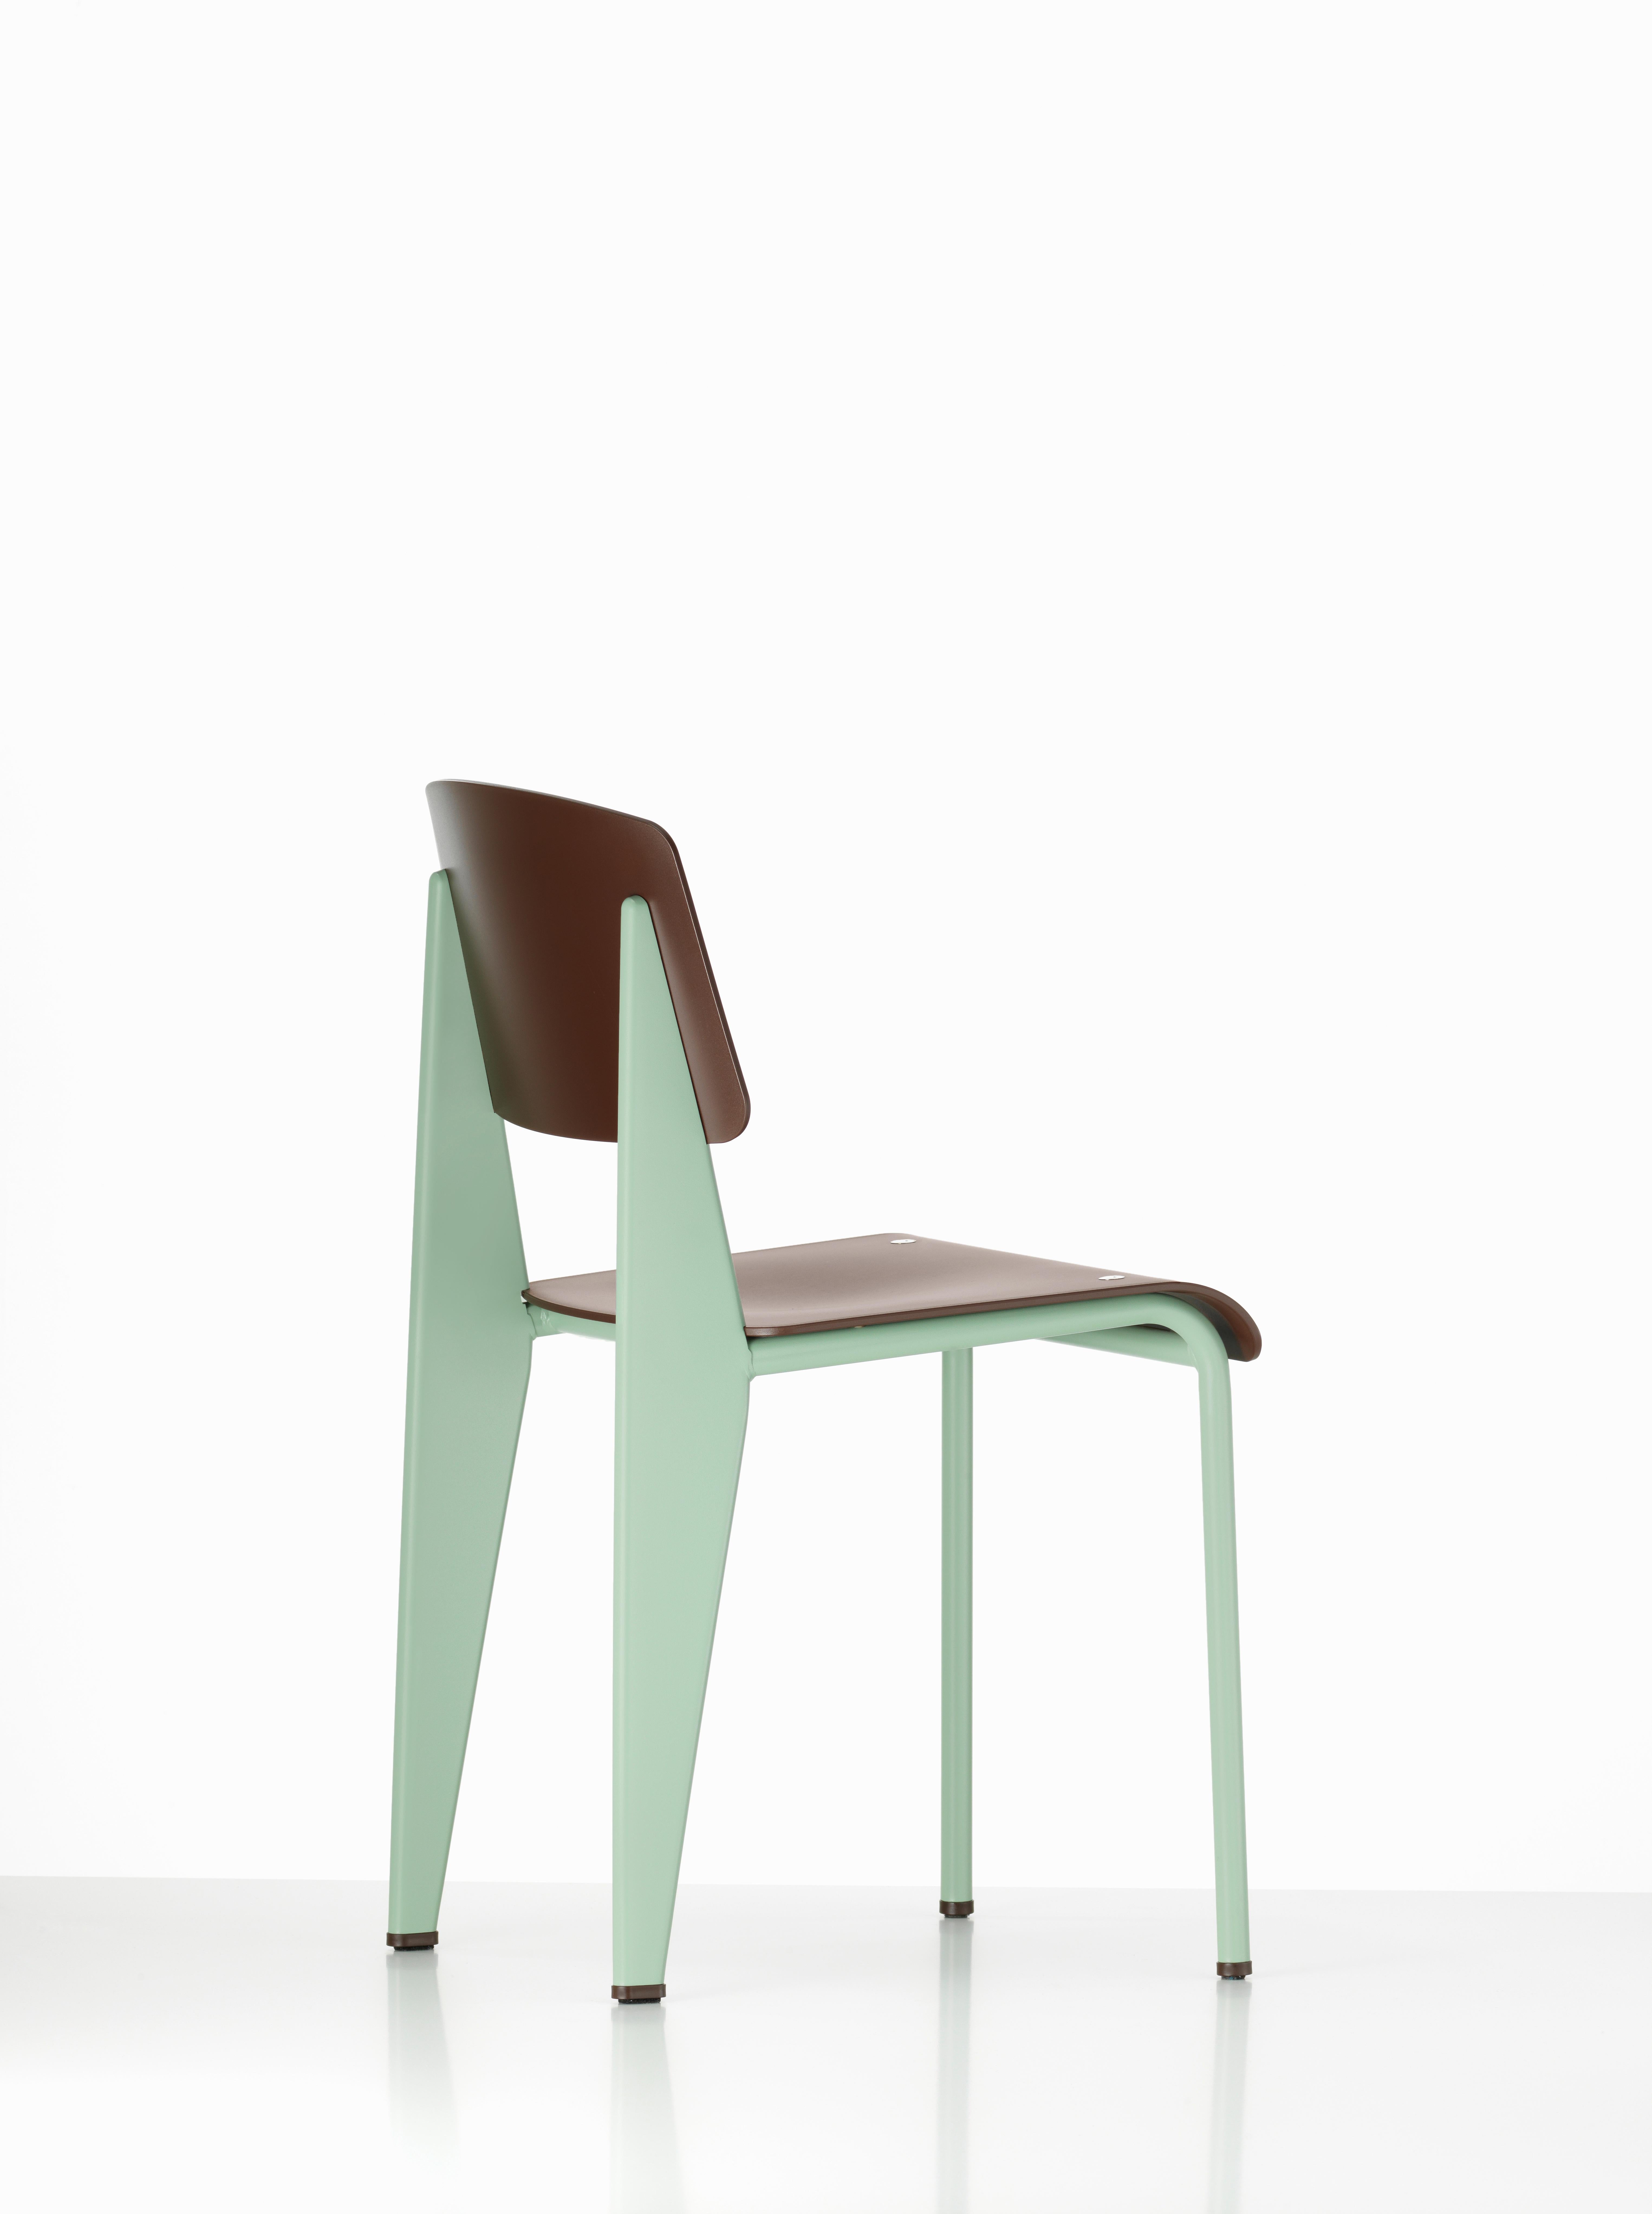 Jean Prouvé standard chair SP in Teak brown and mint metal for Vitra. The standard SP chair is a modernized variation on an early masterpiece by the French designer and engineer Jean Prouvé. Originally designed in 1934, the Standard evolved into one